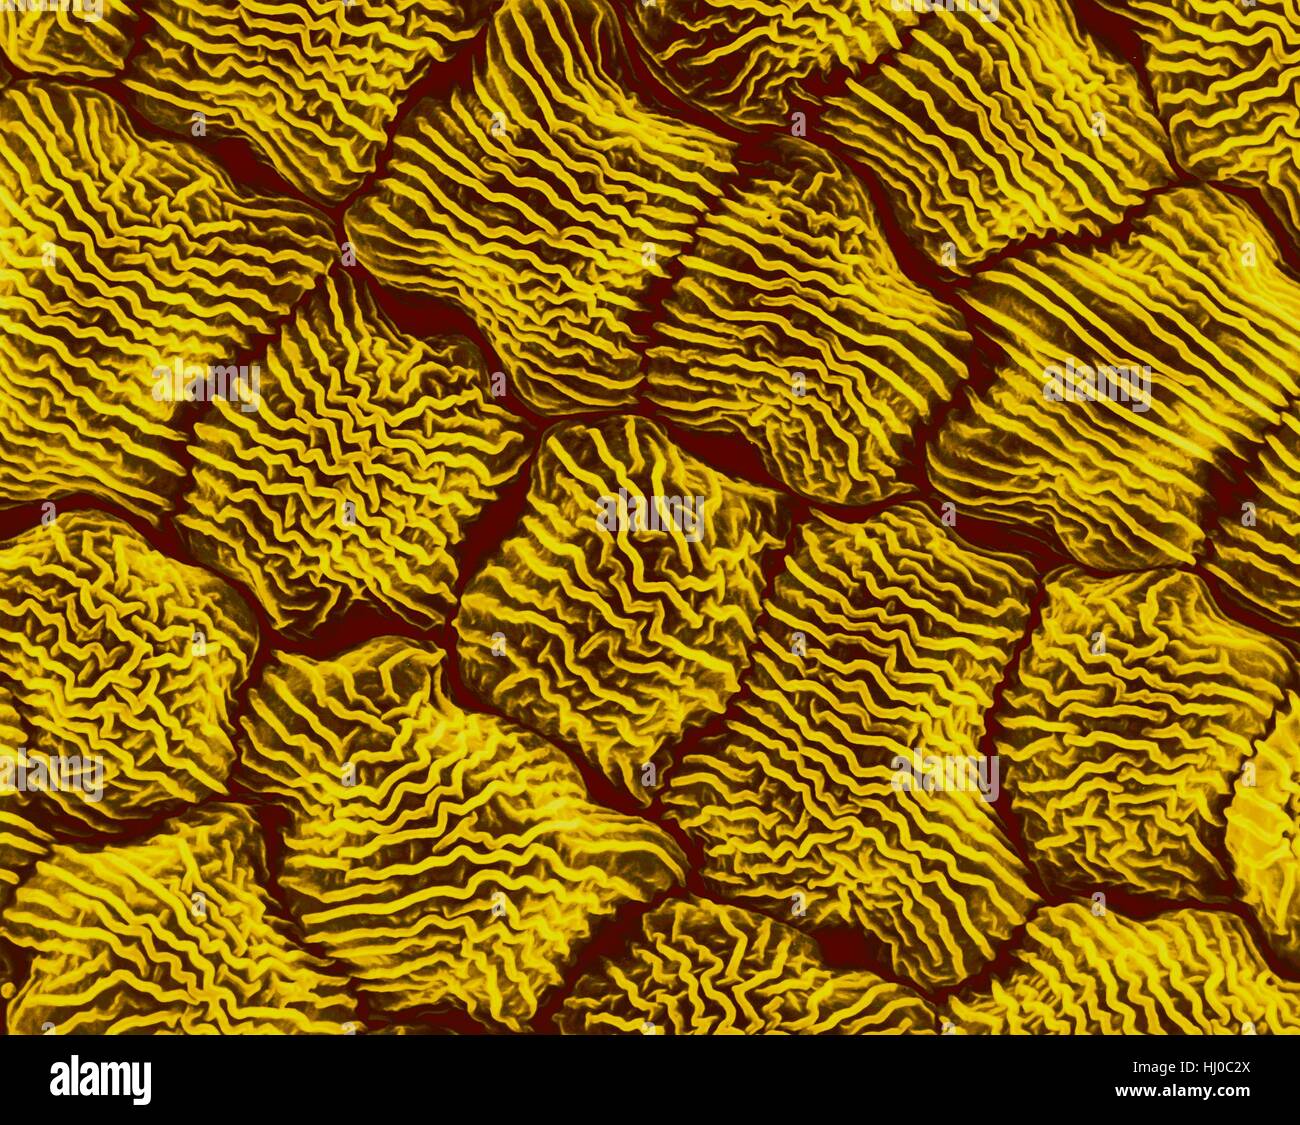 Wild mustard flower petal surface (Brassica kaber),coloured scanning electron micrograph (SEM).Individual cells show an elaborate surface texture.Wild mustard pollen (Brassica kaber) is herbaceous flowering plant (also known as charlock or field mustard) in family Brassicaceae.Other names for this Stock Photo